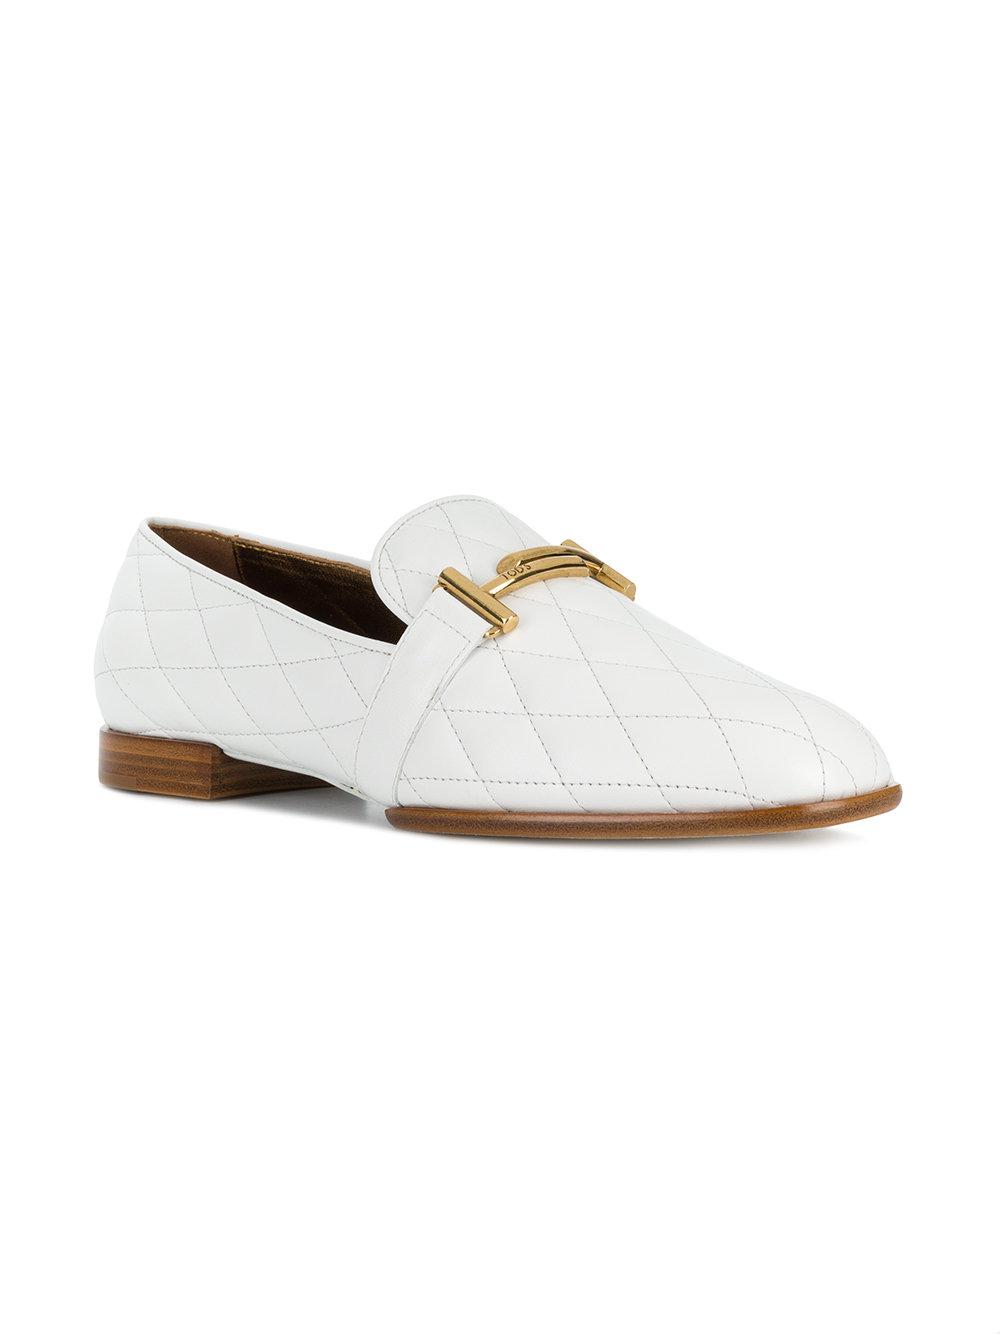 Tod's Double T Quilted Loafers in White | Lyst